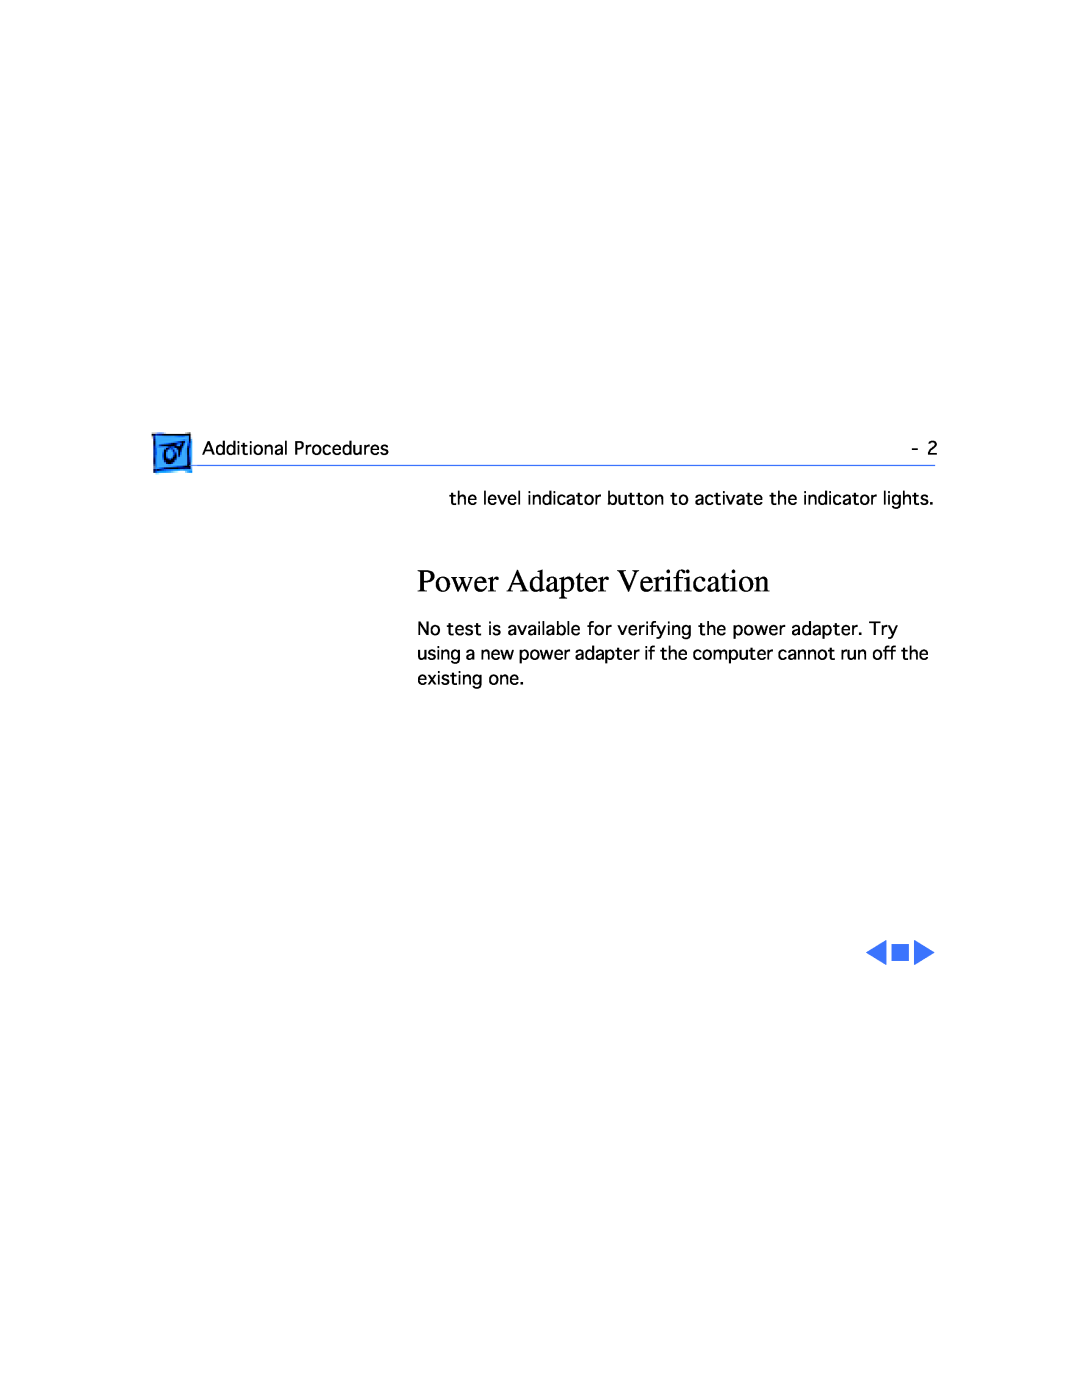 Apple 3400C/200, G3 manual Power Adapter Verification, the level indicator button to activate the indicator lights 